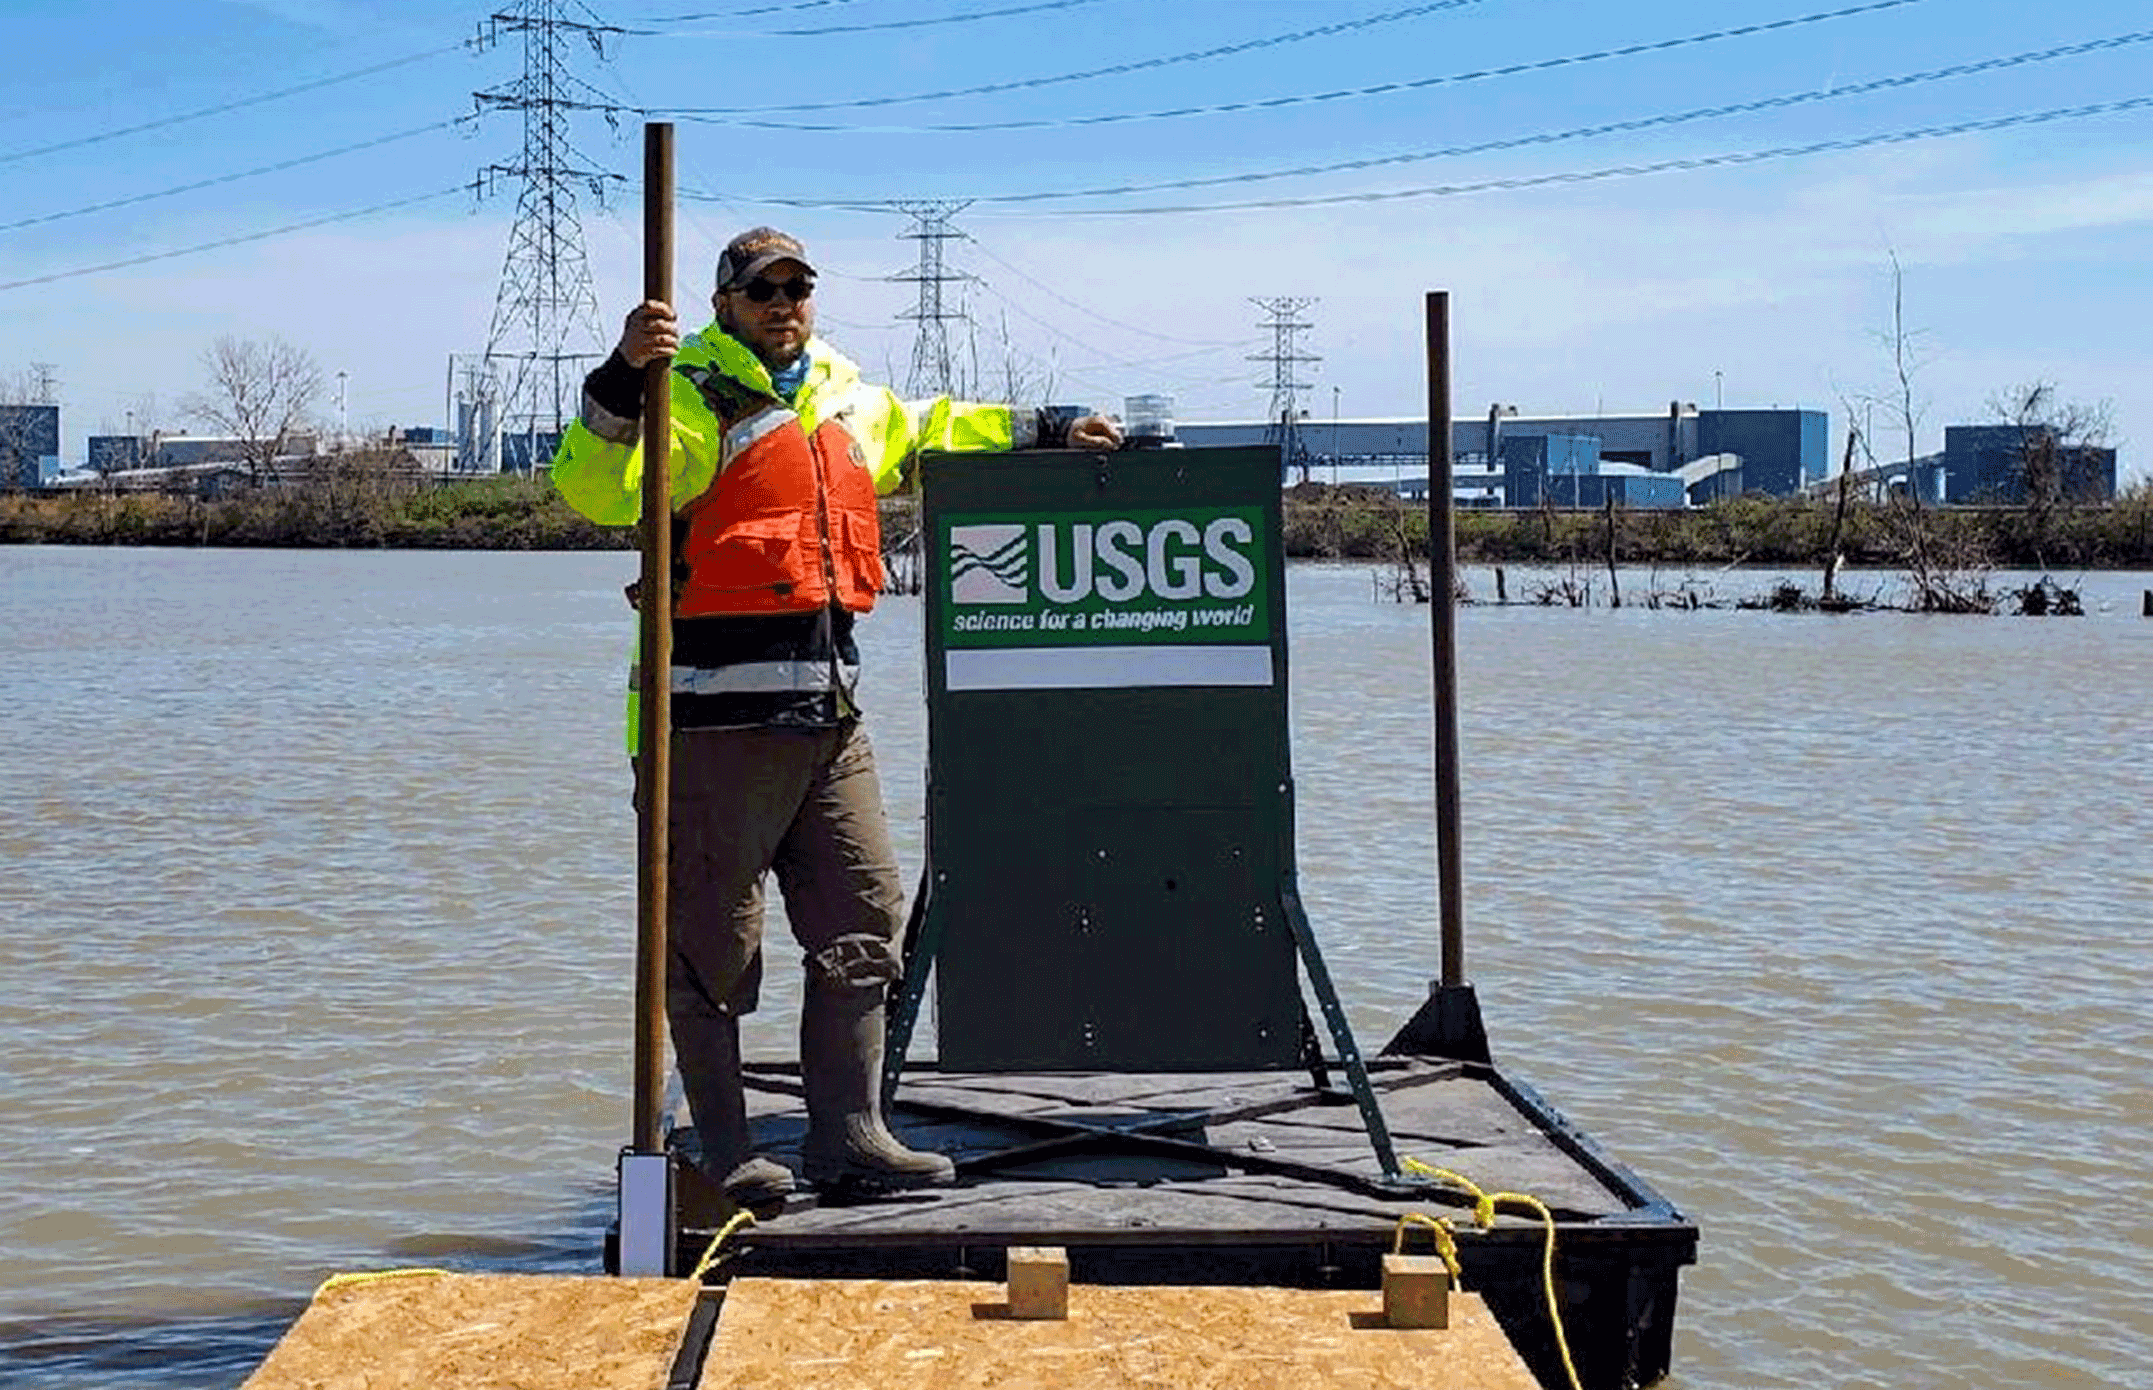 A biologist stands on a fully constructed bait delivery platform floating on water.